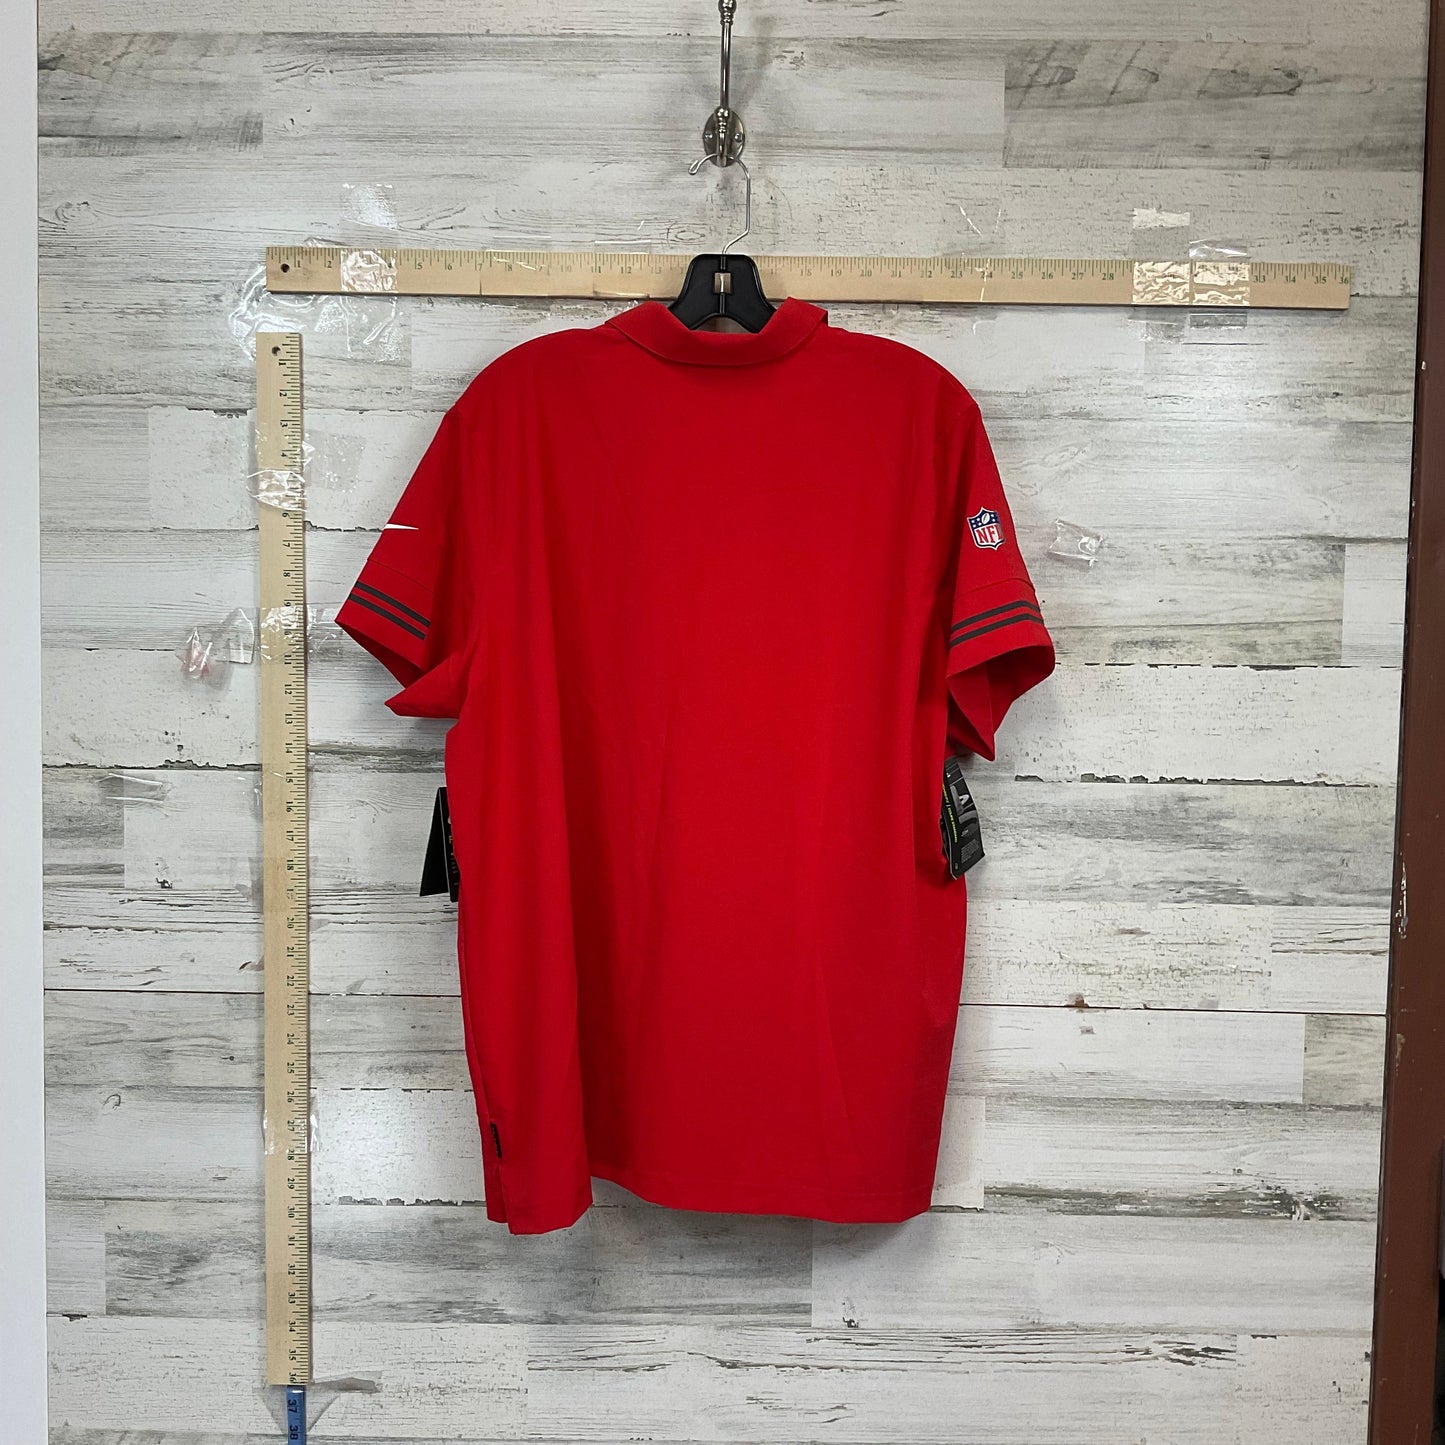 Red Top Short Sleeve Nike Apparel, Size Xxl